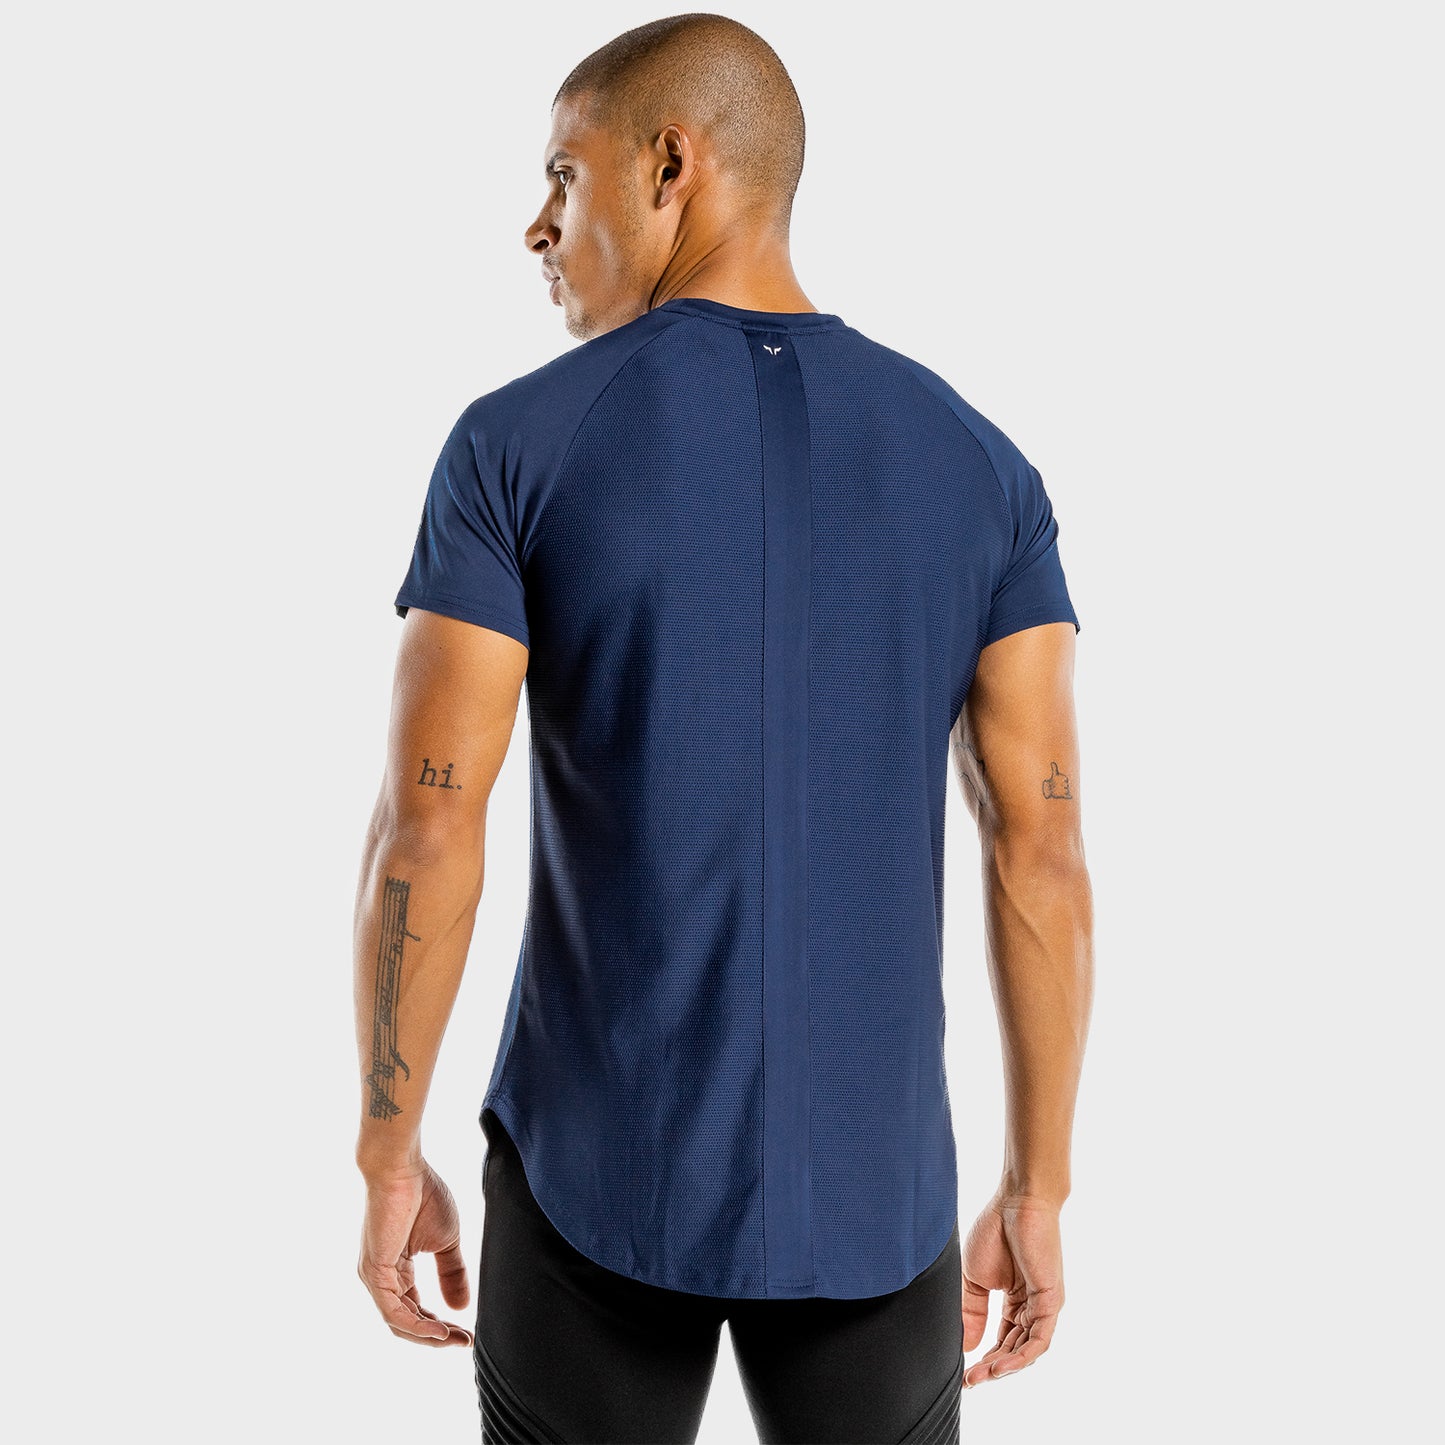 squatwolf-gym-wear-limitless-razor-tee-navy-workout-shirts-for-men